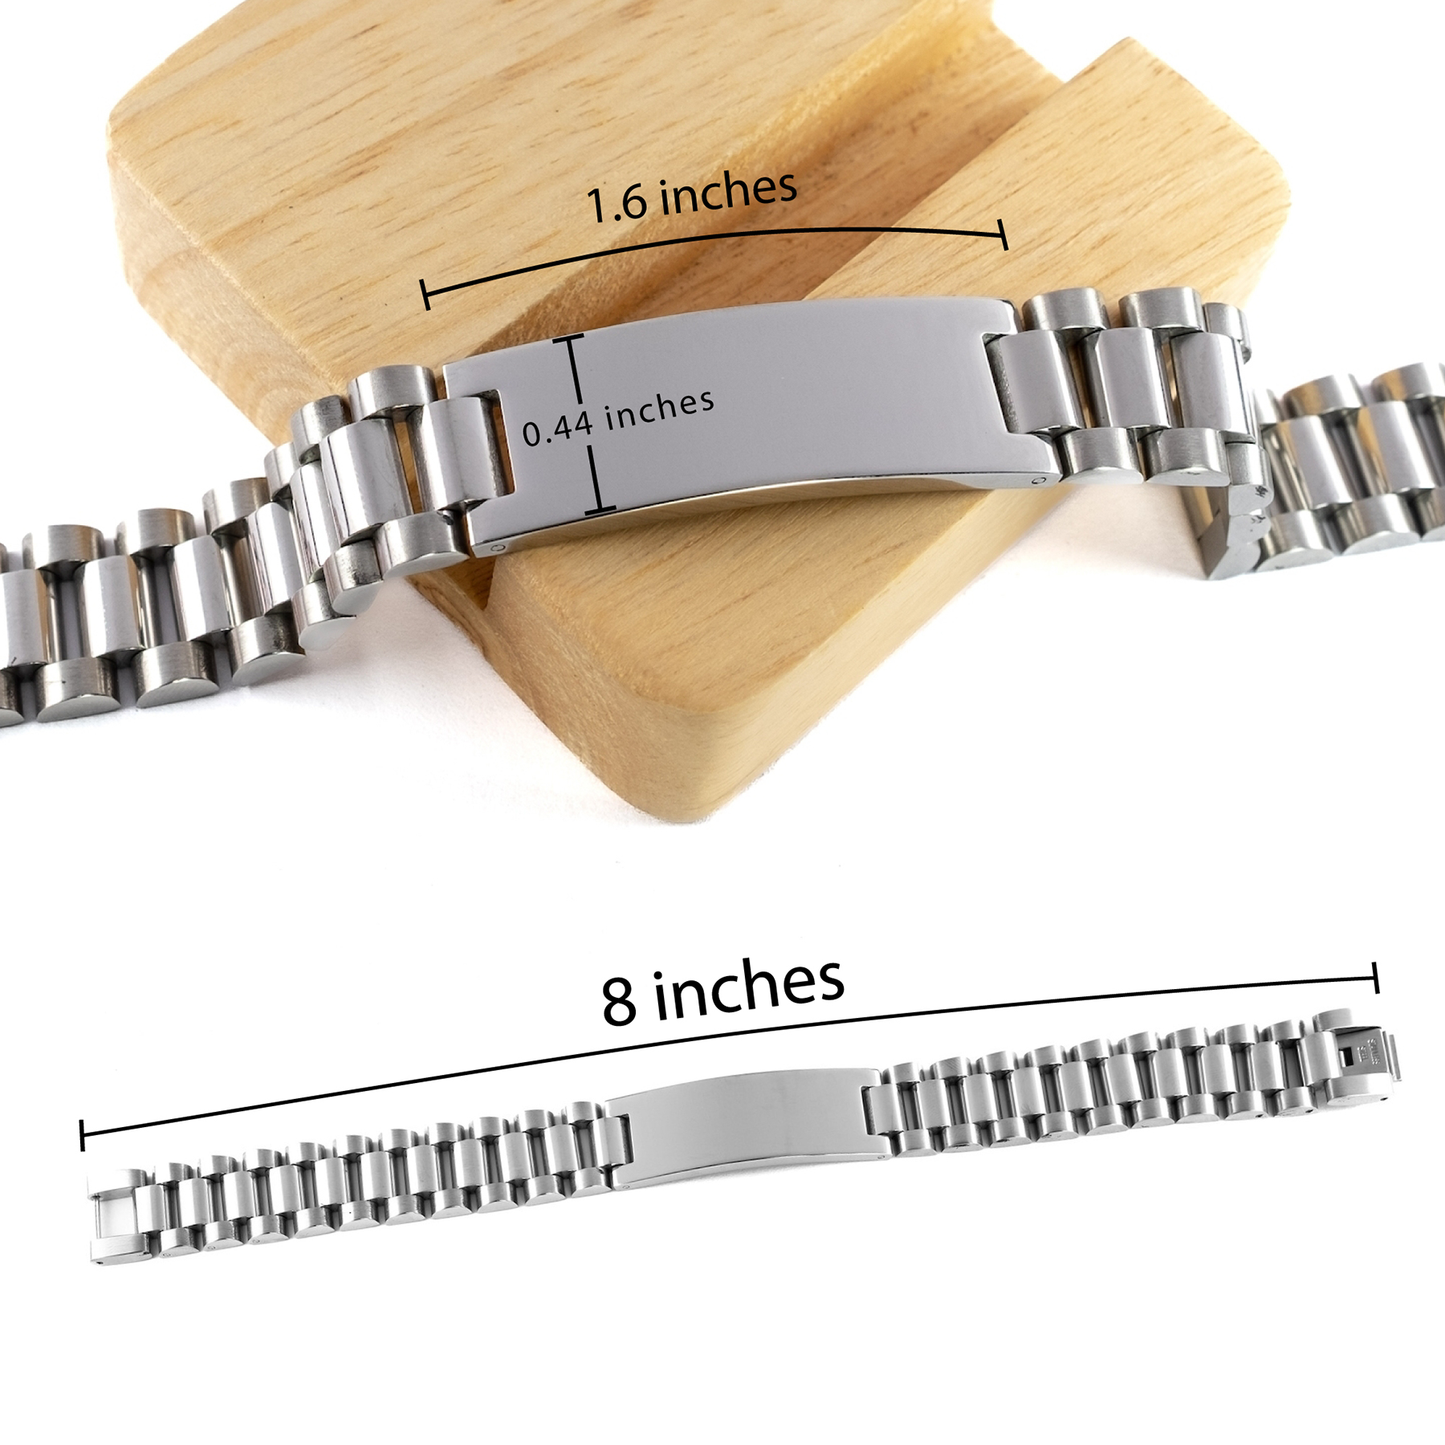 Daughter In Law Motivational Gifts from Mother In Law, Remember to never give up no matter what, Inspirational Birthday Ladder Stainless Steel Bracelet for Daughter In Law